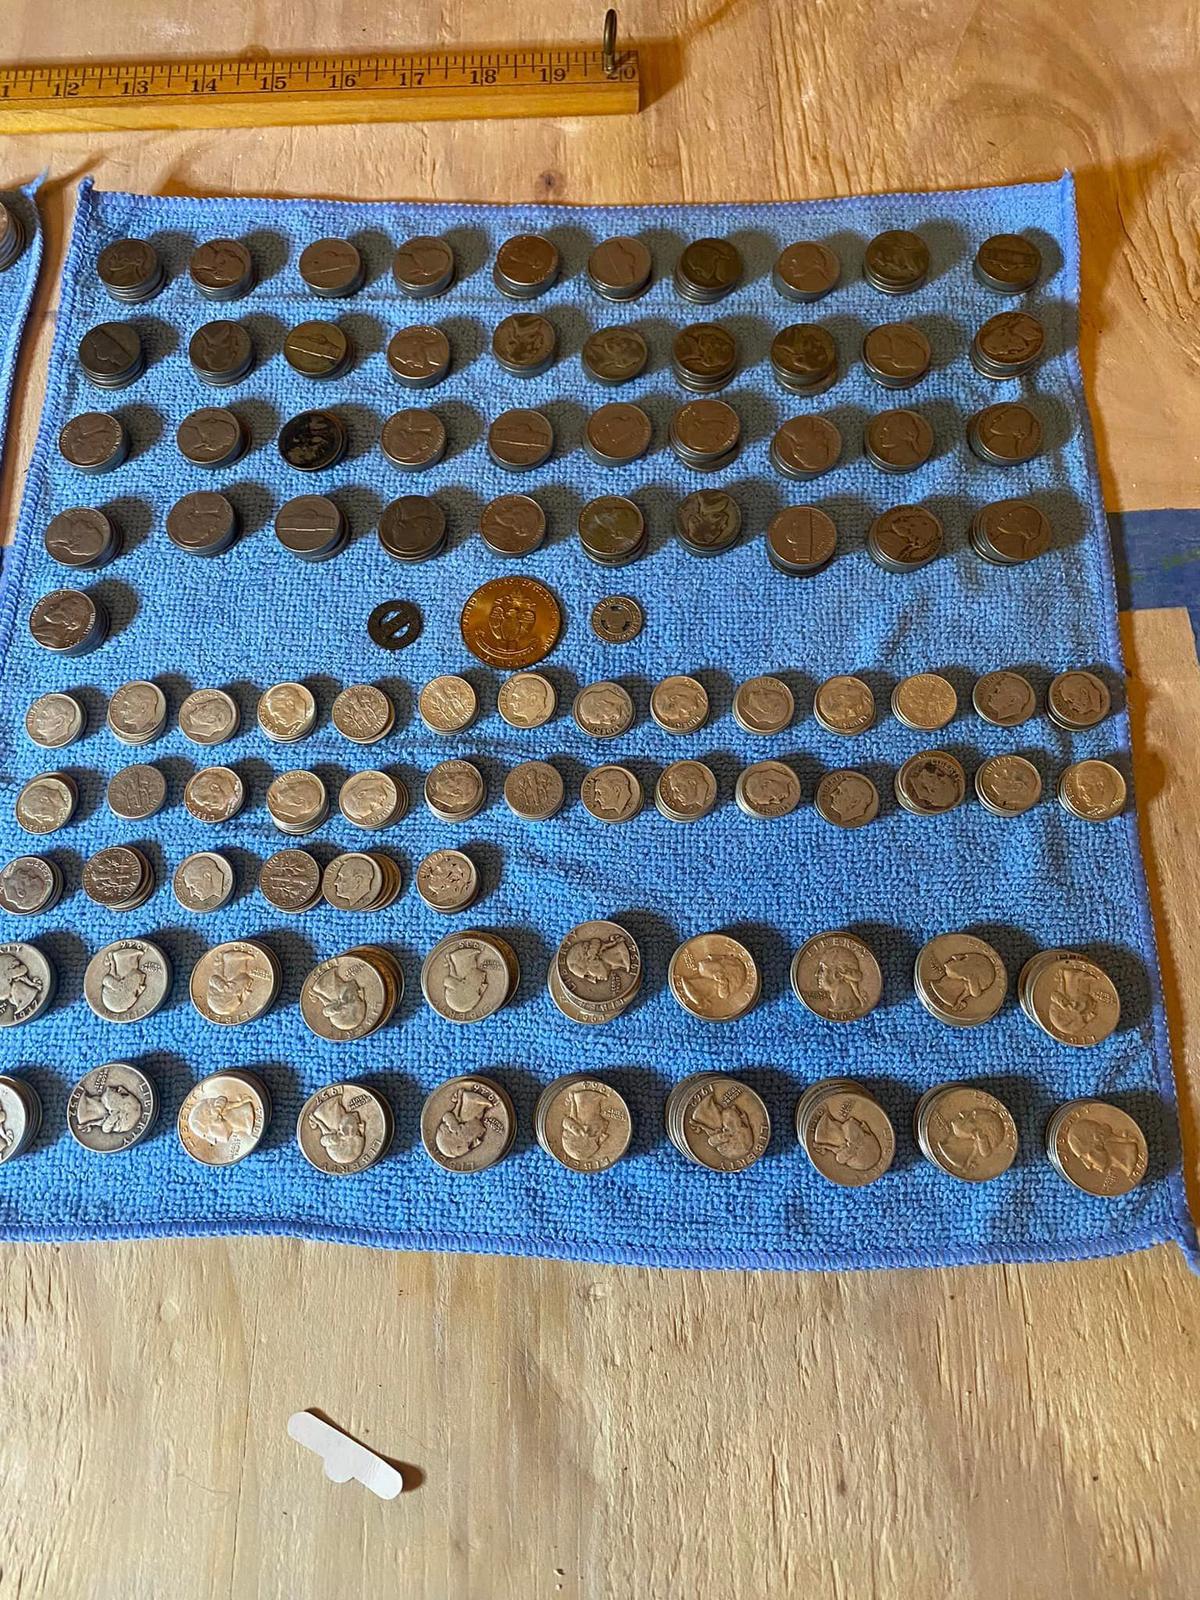 Coins found in the manor. (Courtesy of <a href="https://www.facebook.com/profile.php?id=100076974185503">Krasnesky Manor for Wayward Cats</a>)